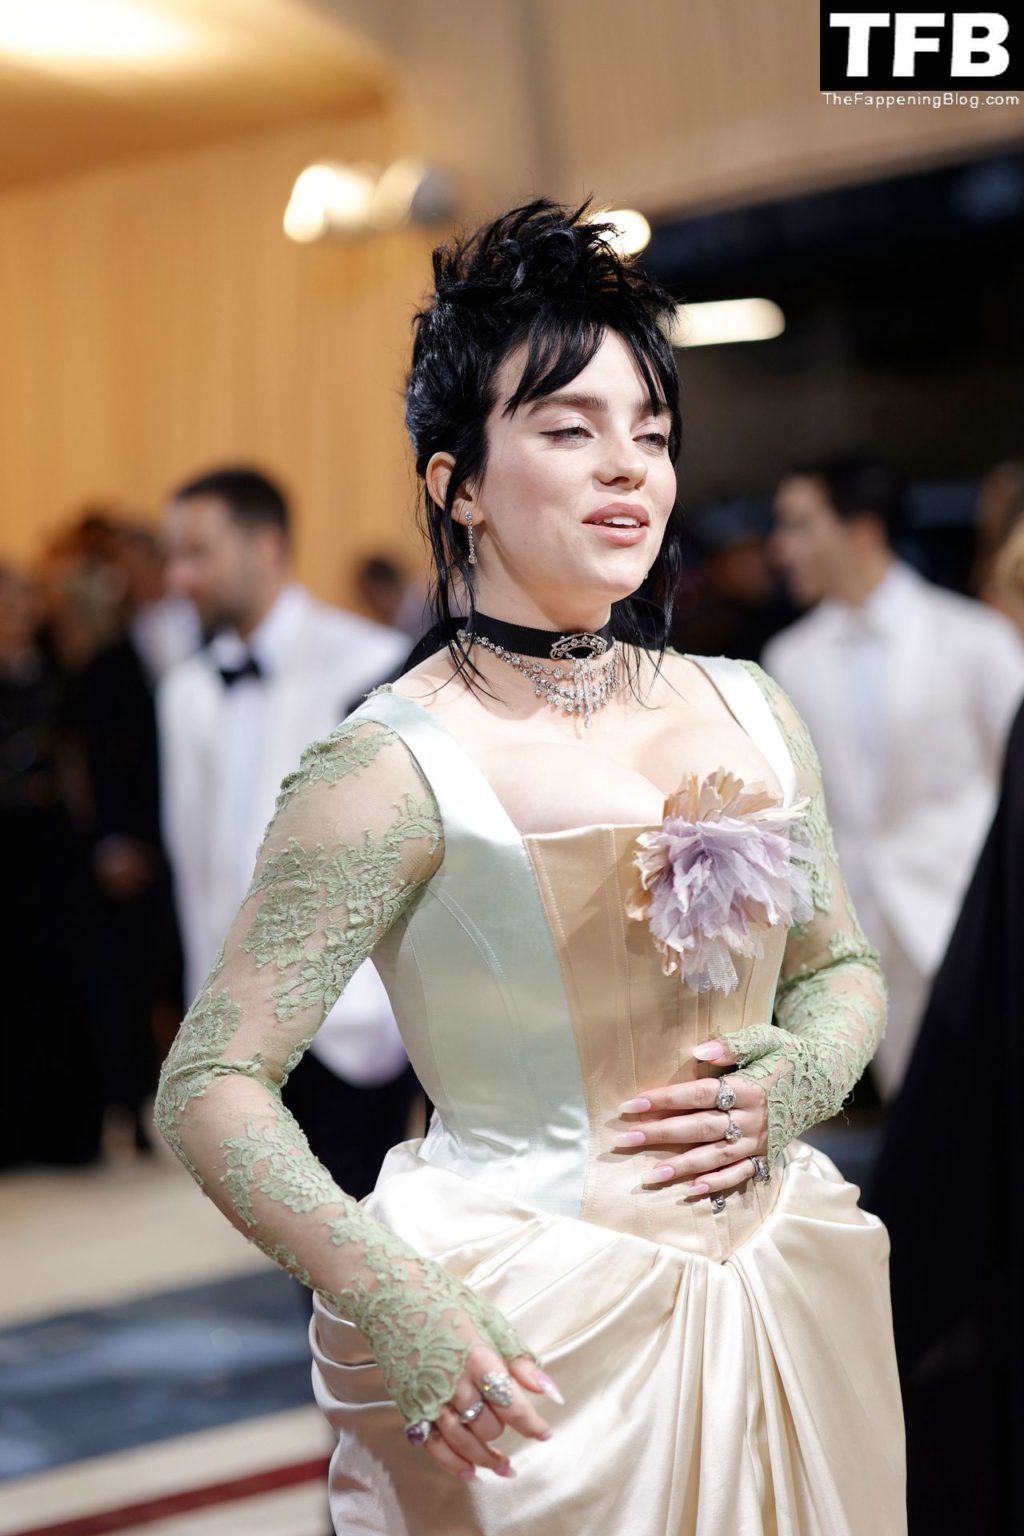 Billie Eilish Sexy The Fappening Blog 119 1024x1536 - Billie Eilish Showcases Nice Cleavage at The 2022 Met Gala in NYC (155 Photos)